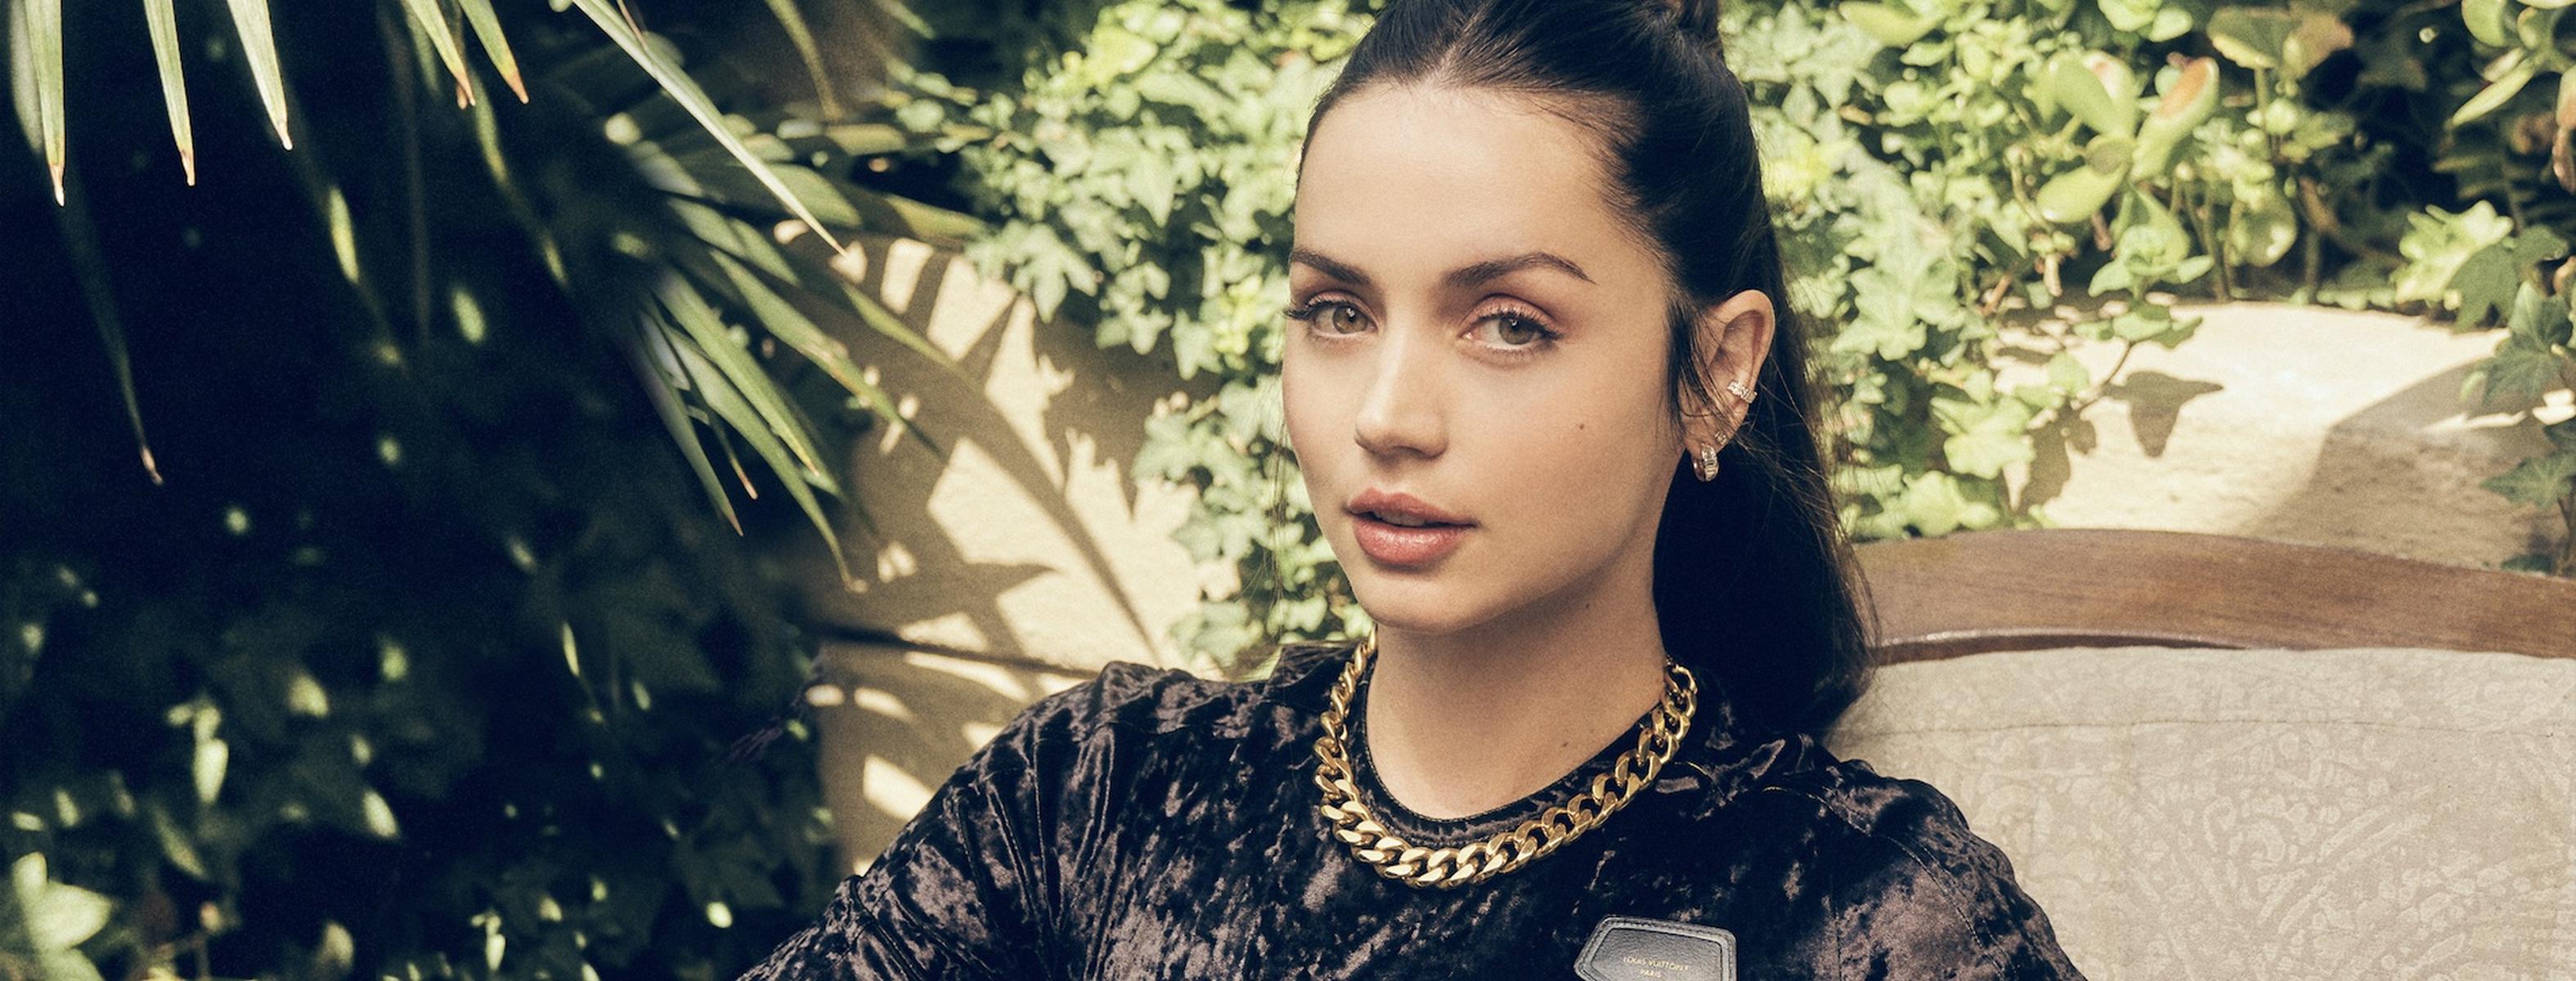 Why Ana de Armas Almost Passed Up Her 'Knives Out' Role